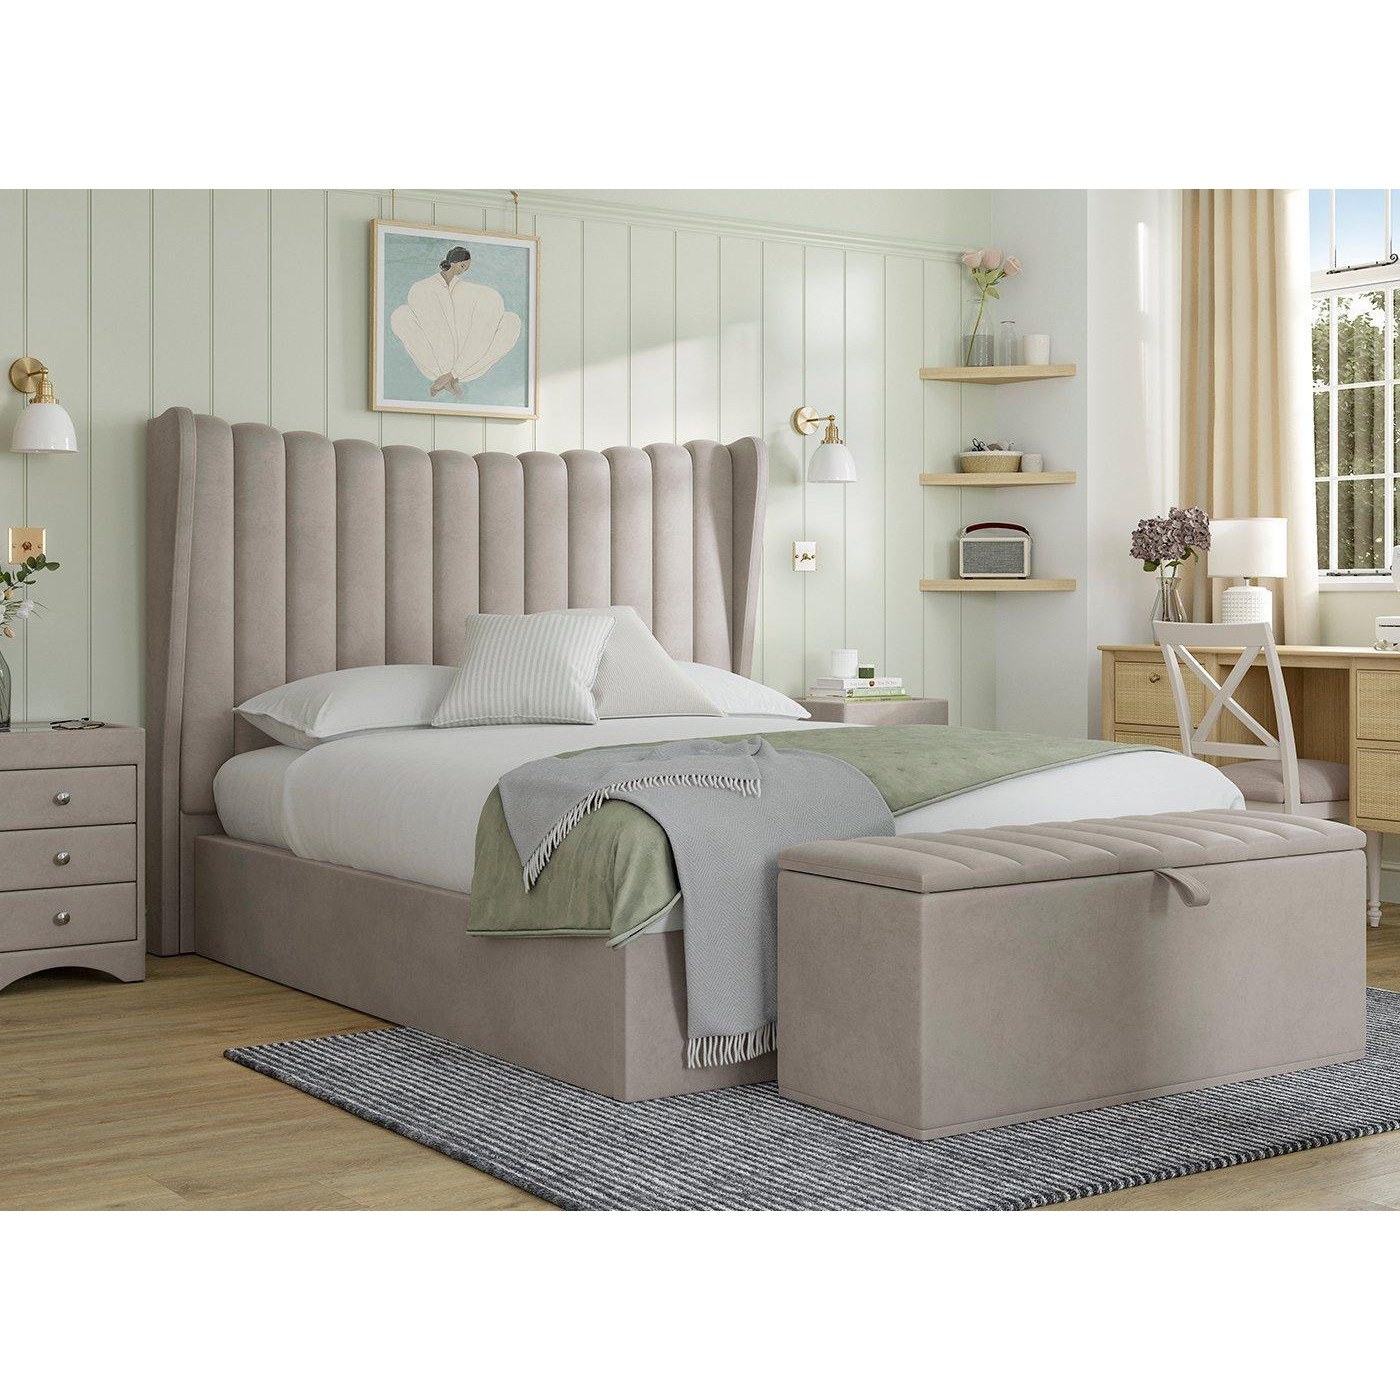 Octavia Upholstered Ottoman Bed Frame - 4'6 Double - Grey